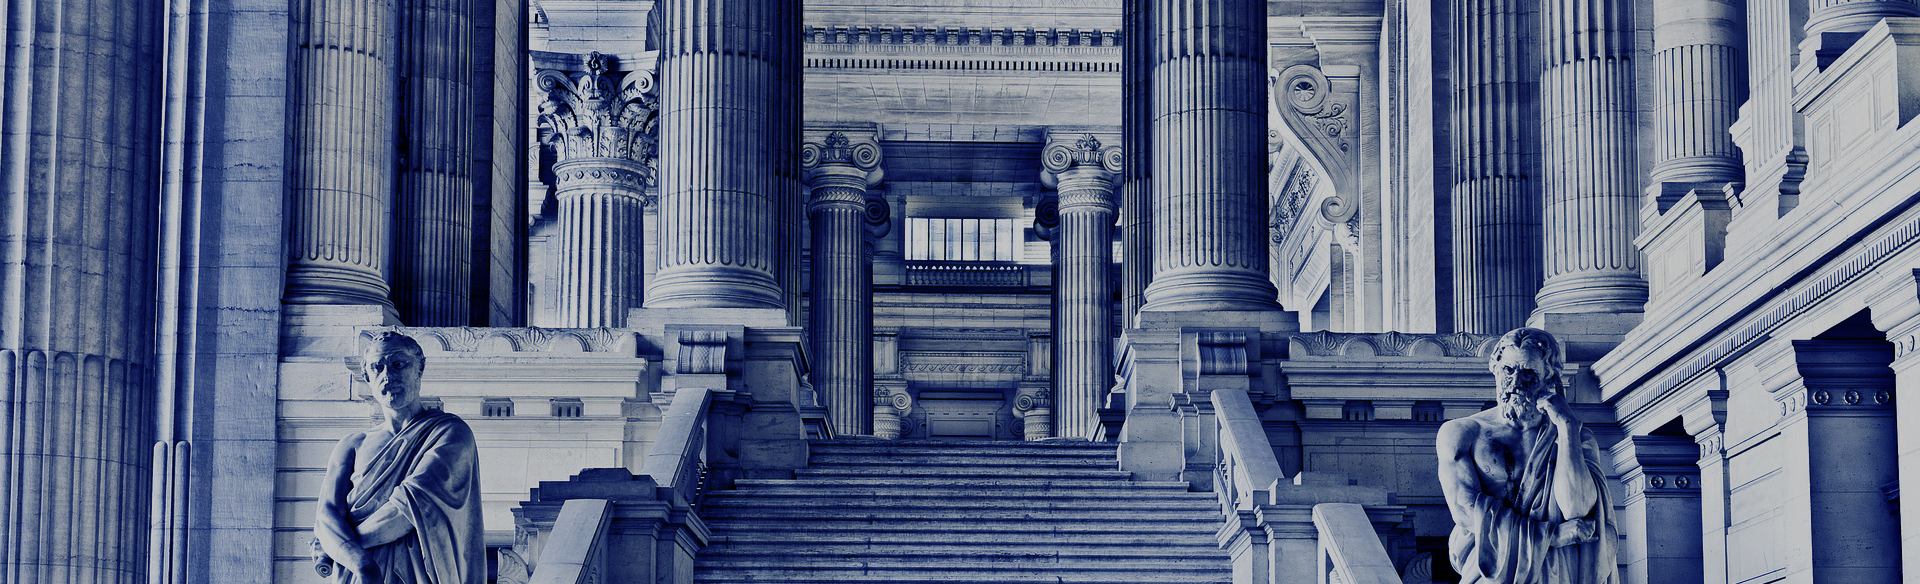 Palace of justice image